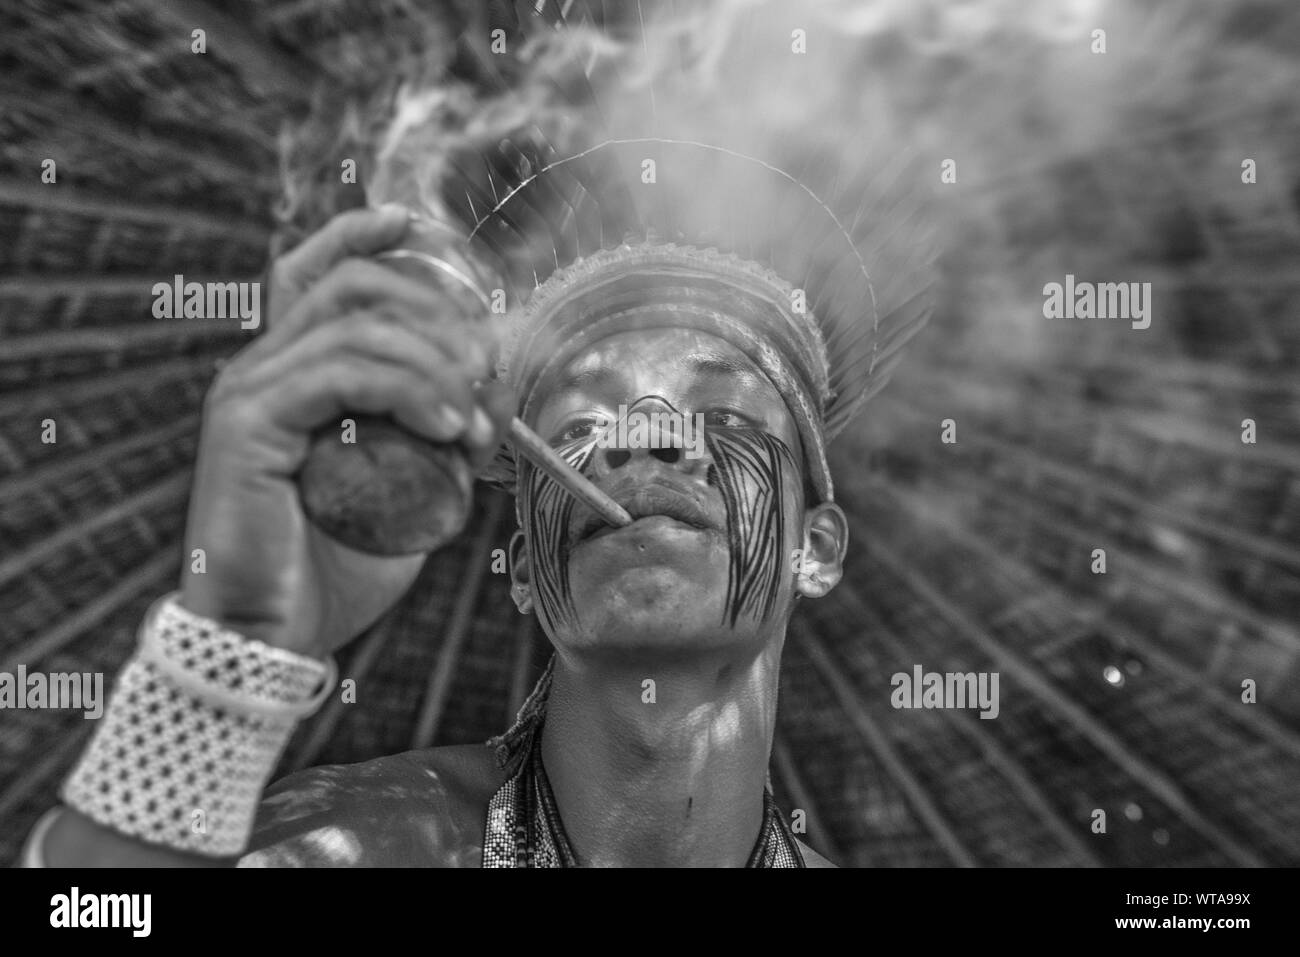 Brazilian Indian smokes traditional pipe at the village Stock Photo